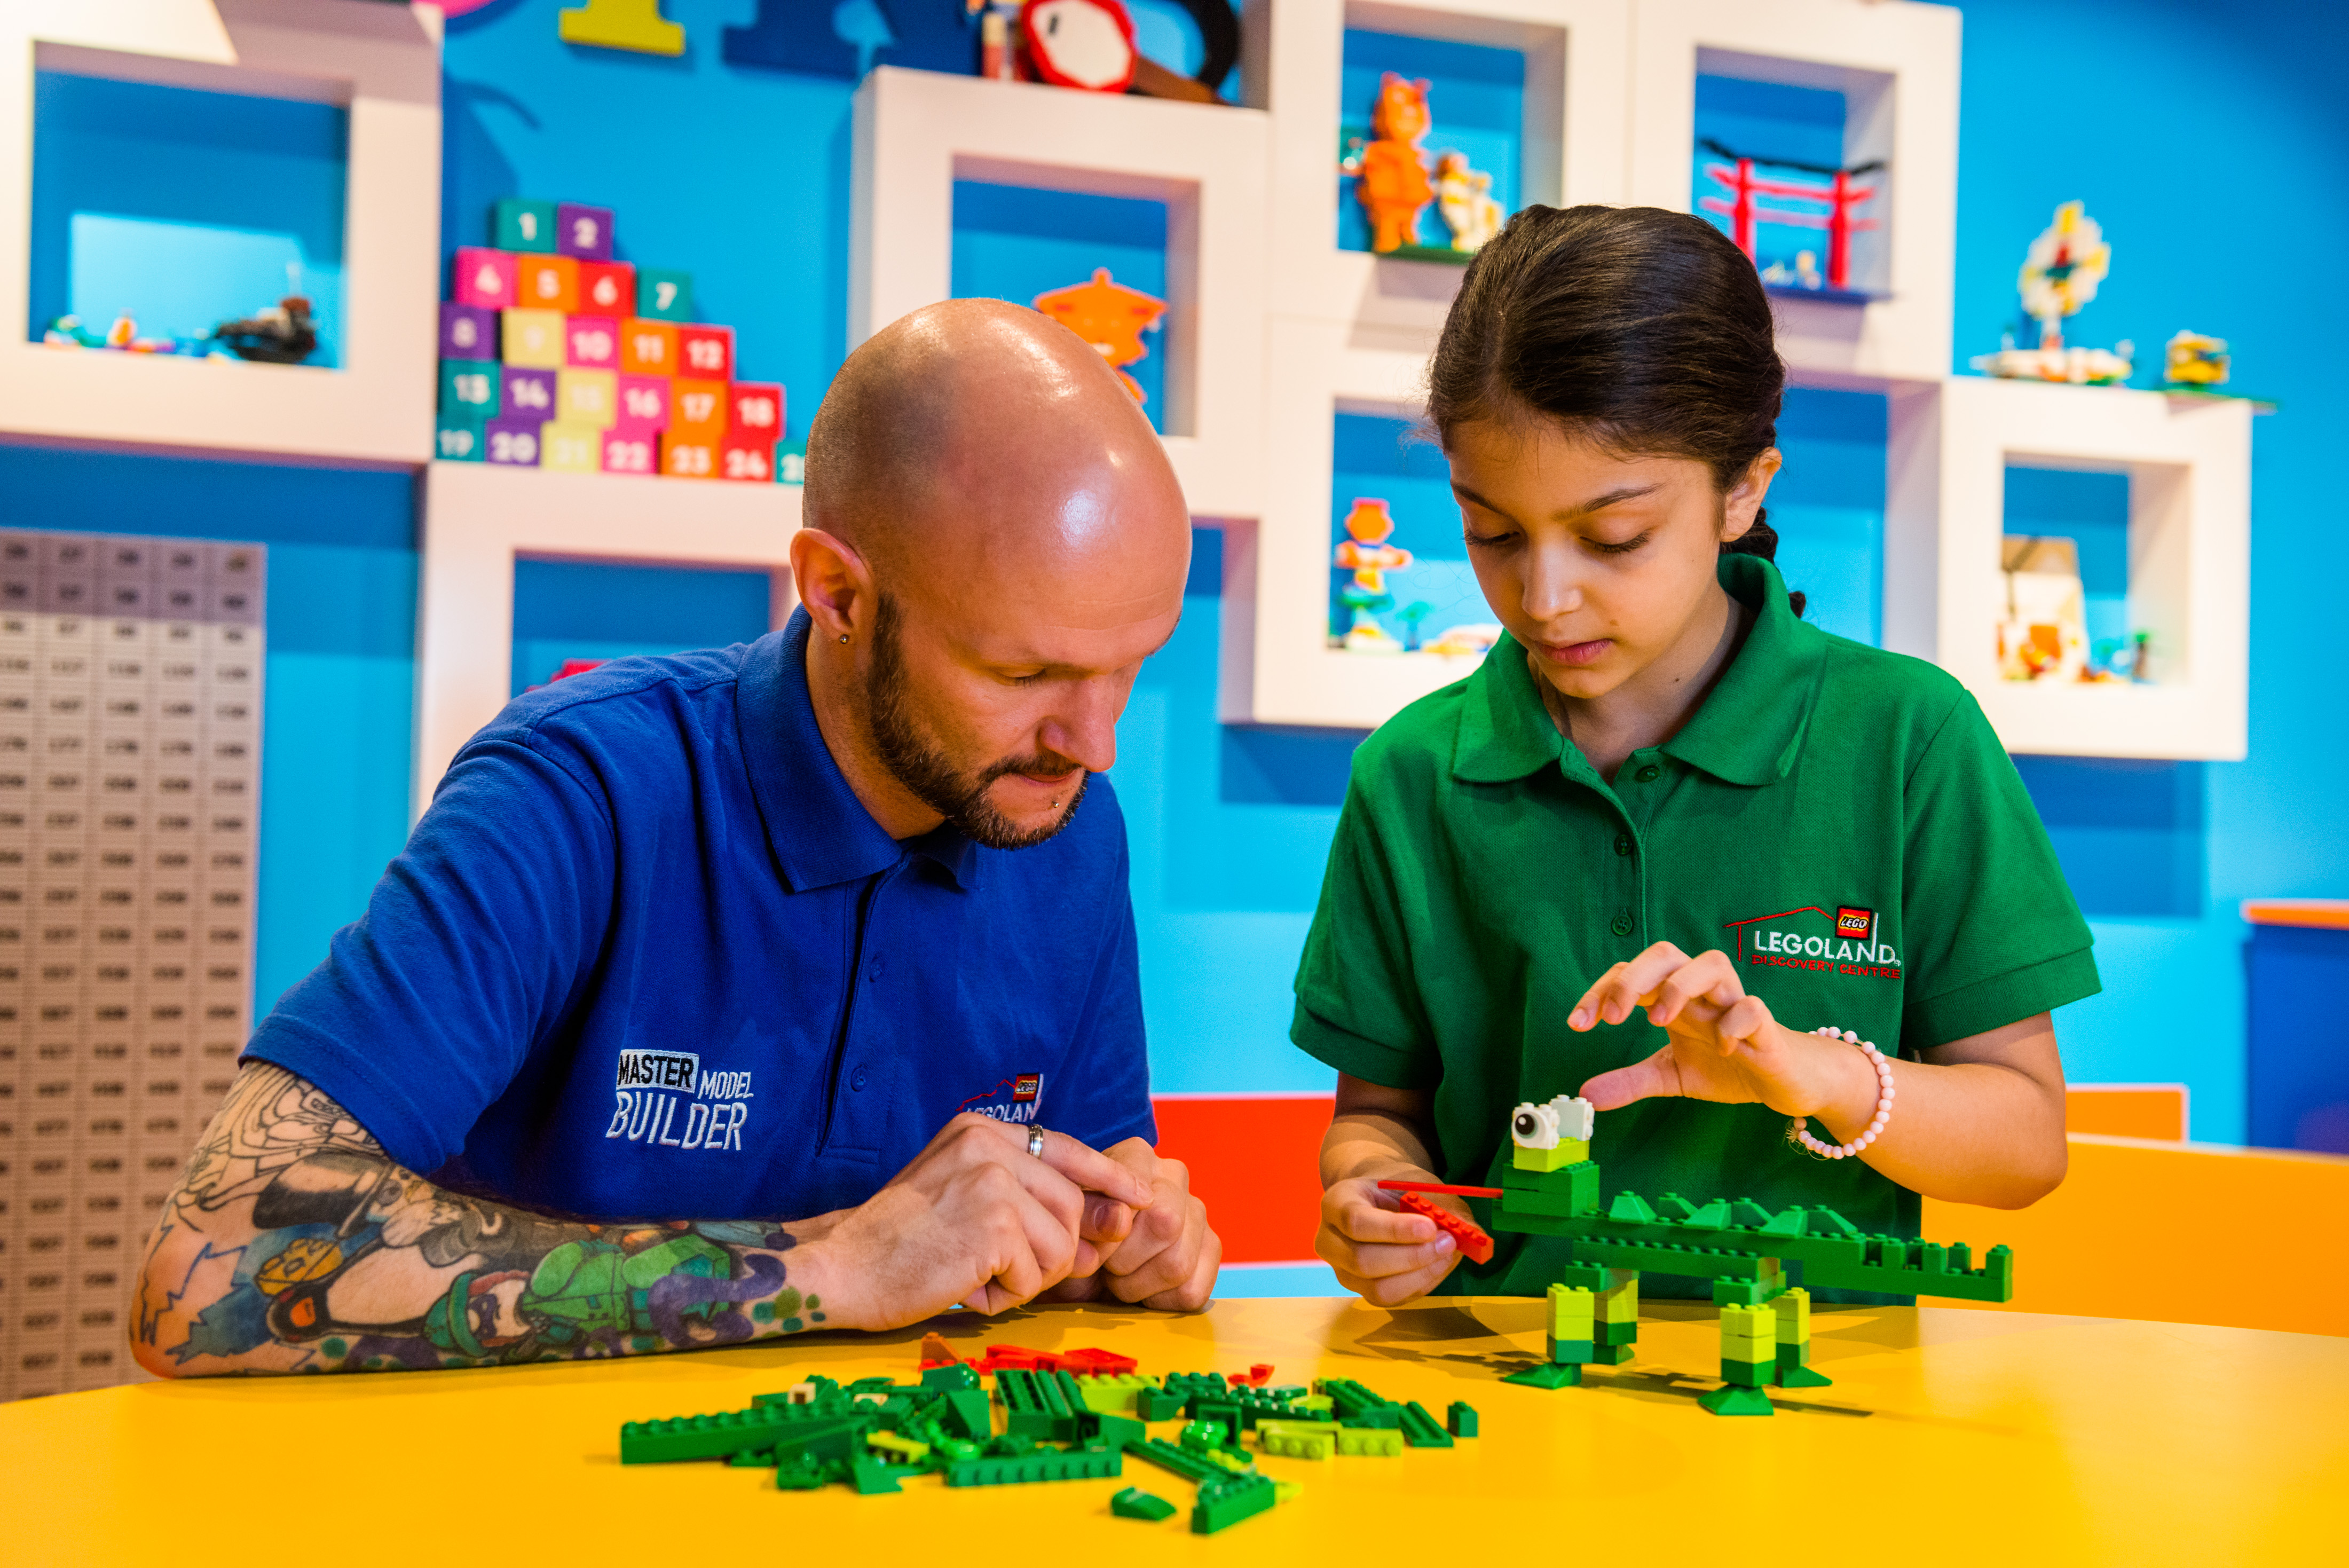 LEGO Masters at LEGOLAND Discovery Centre Manchester